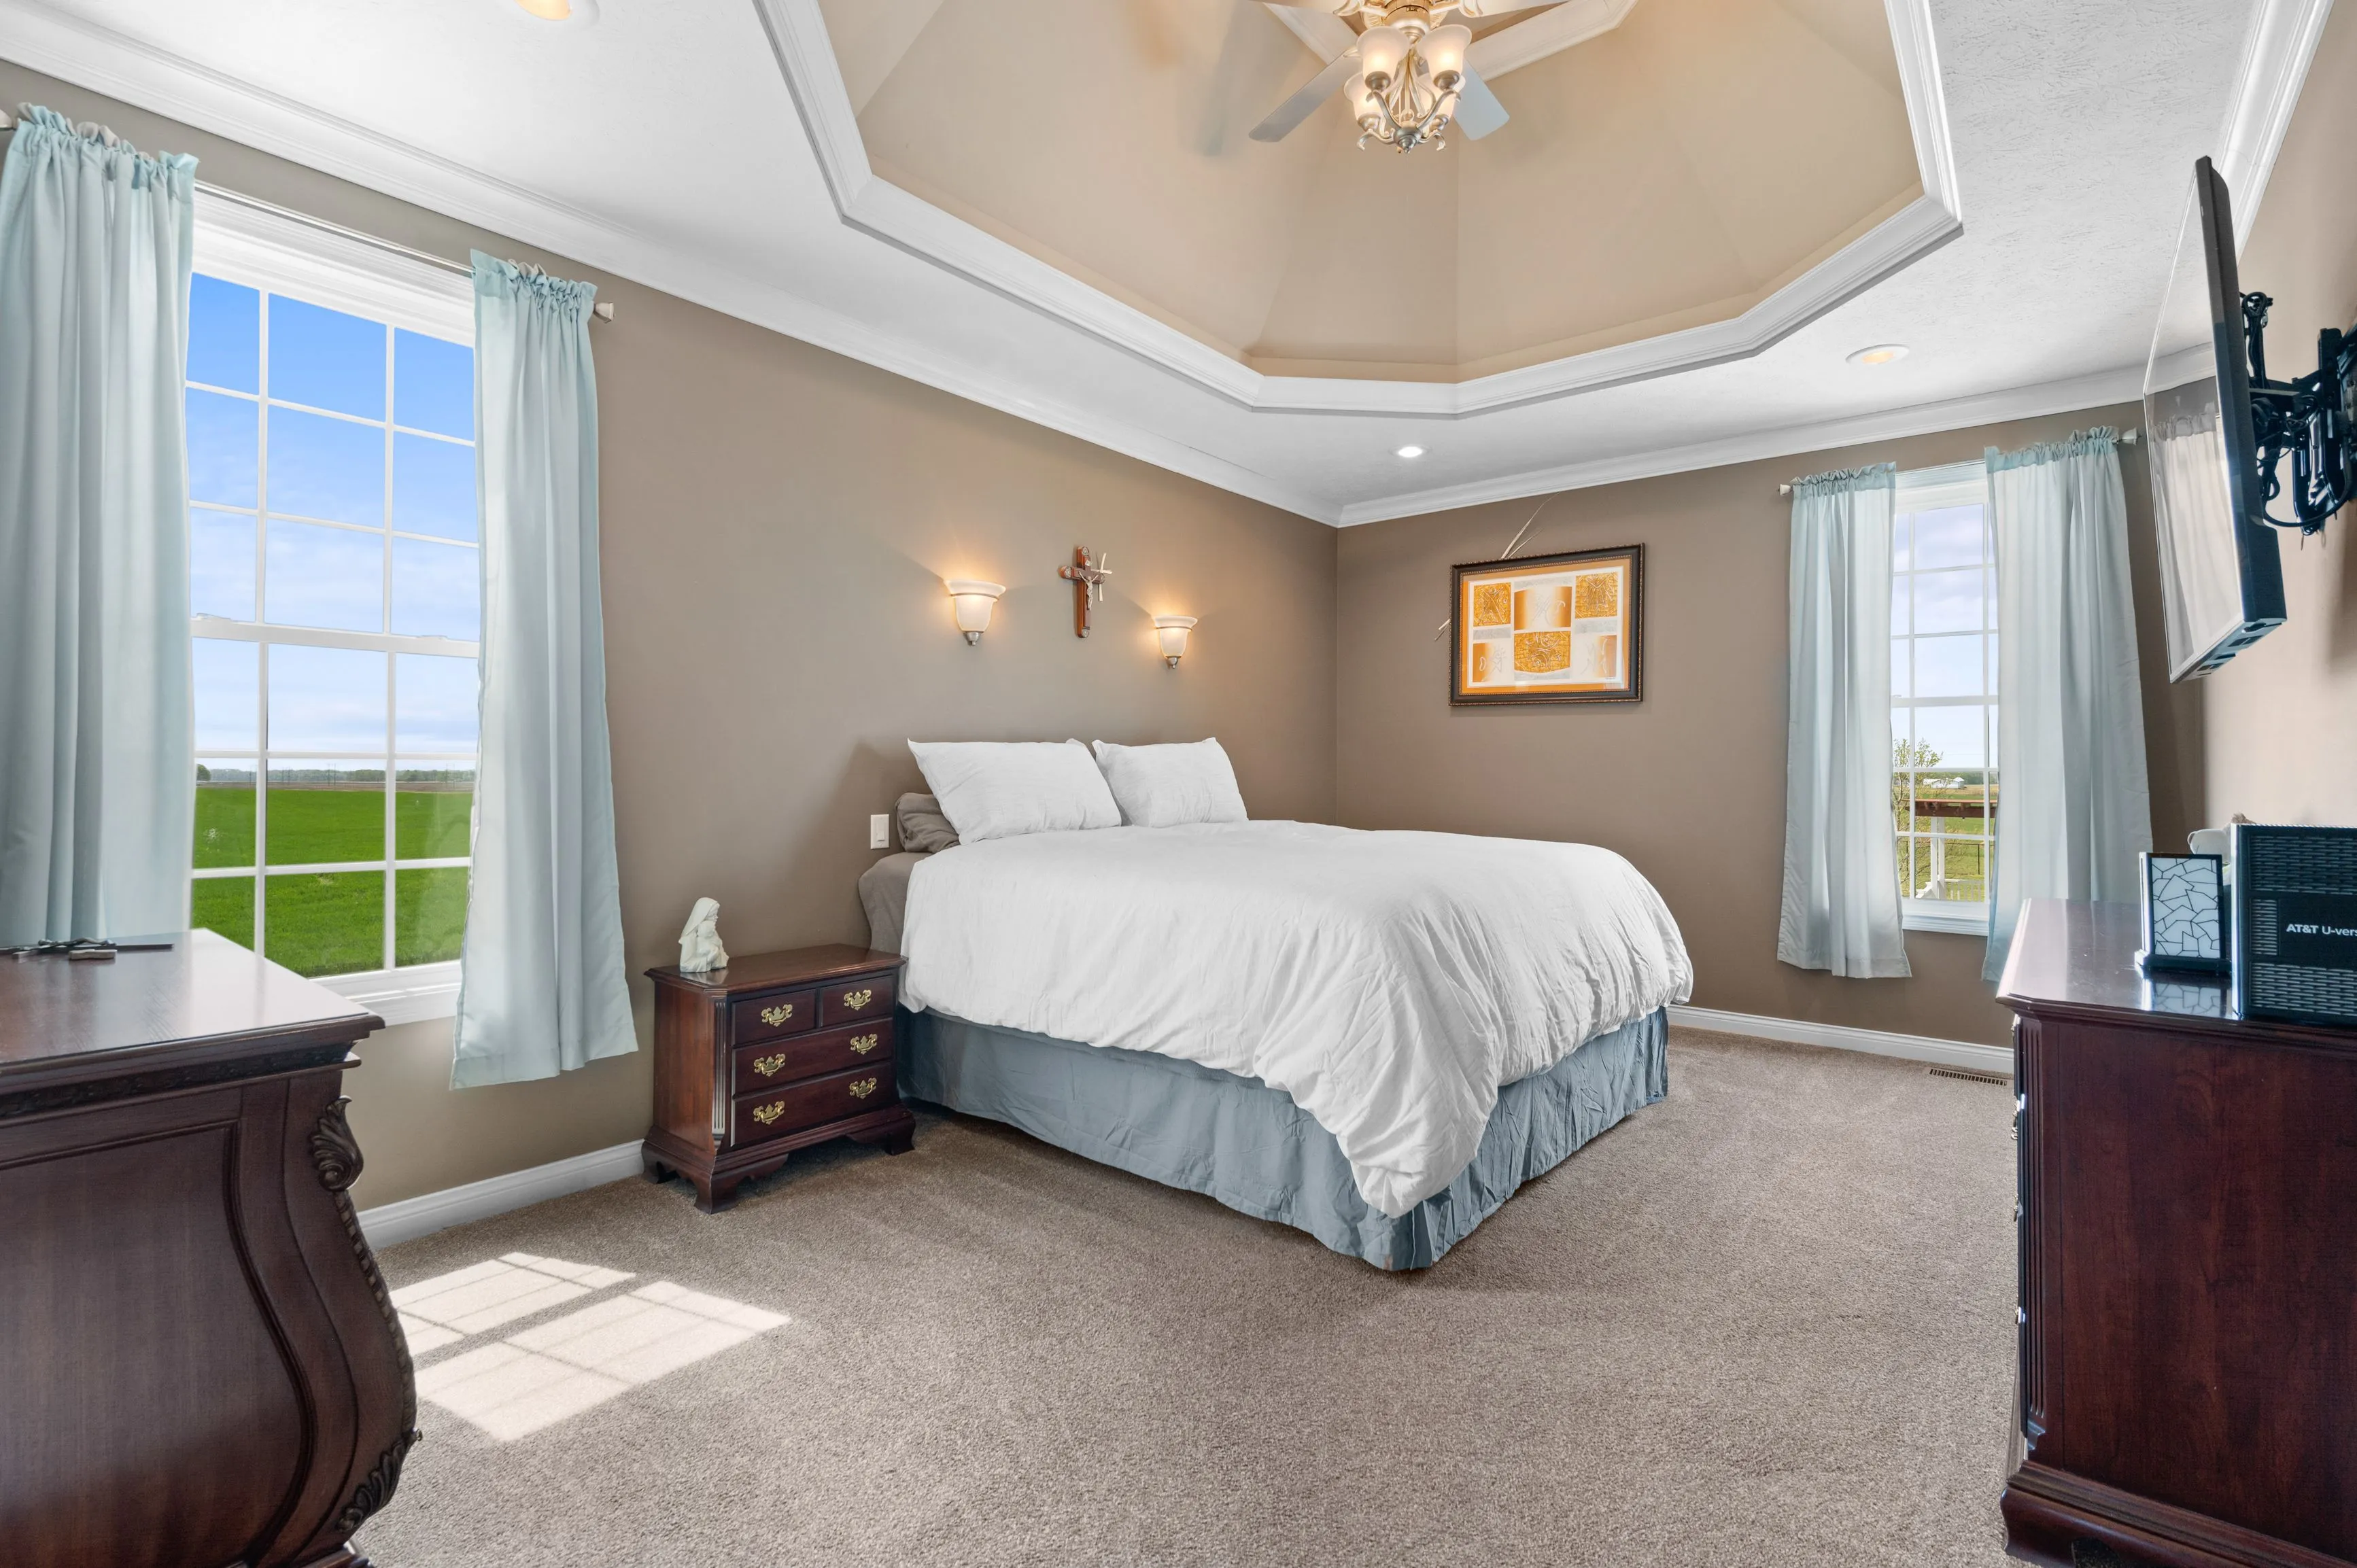 Elegant bedroom with a queen-sized bed, wooden furniture, and a tray ceiling with a ceiling fan.